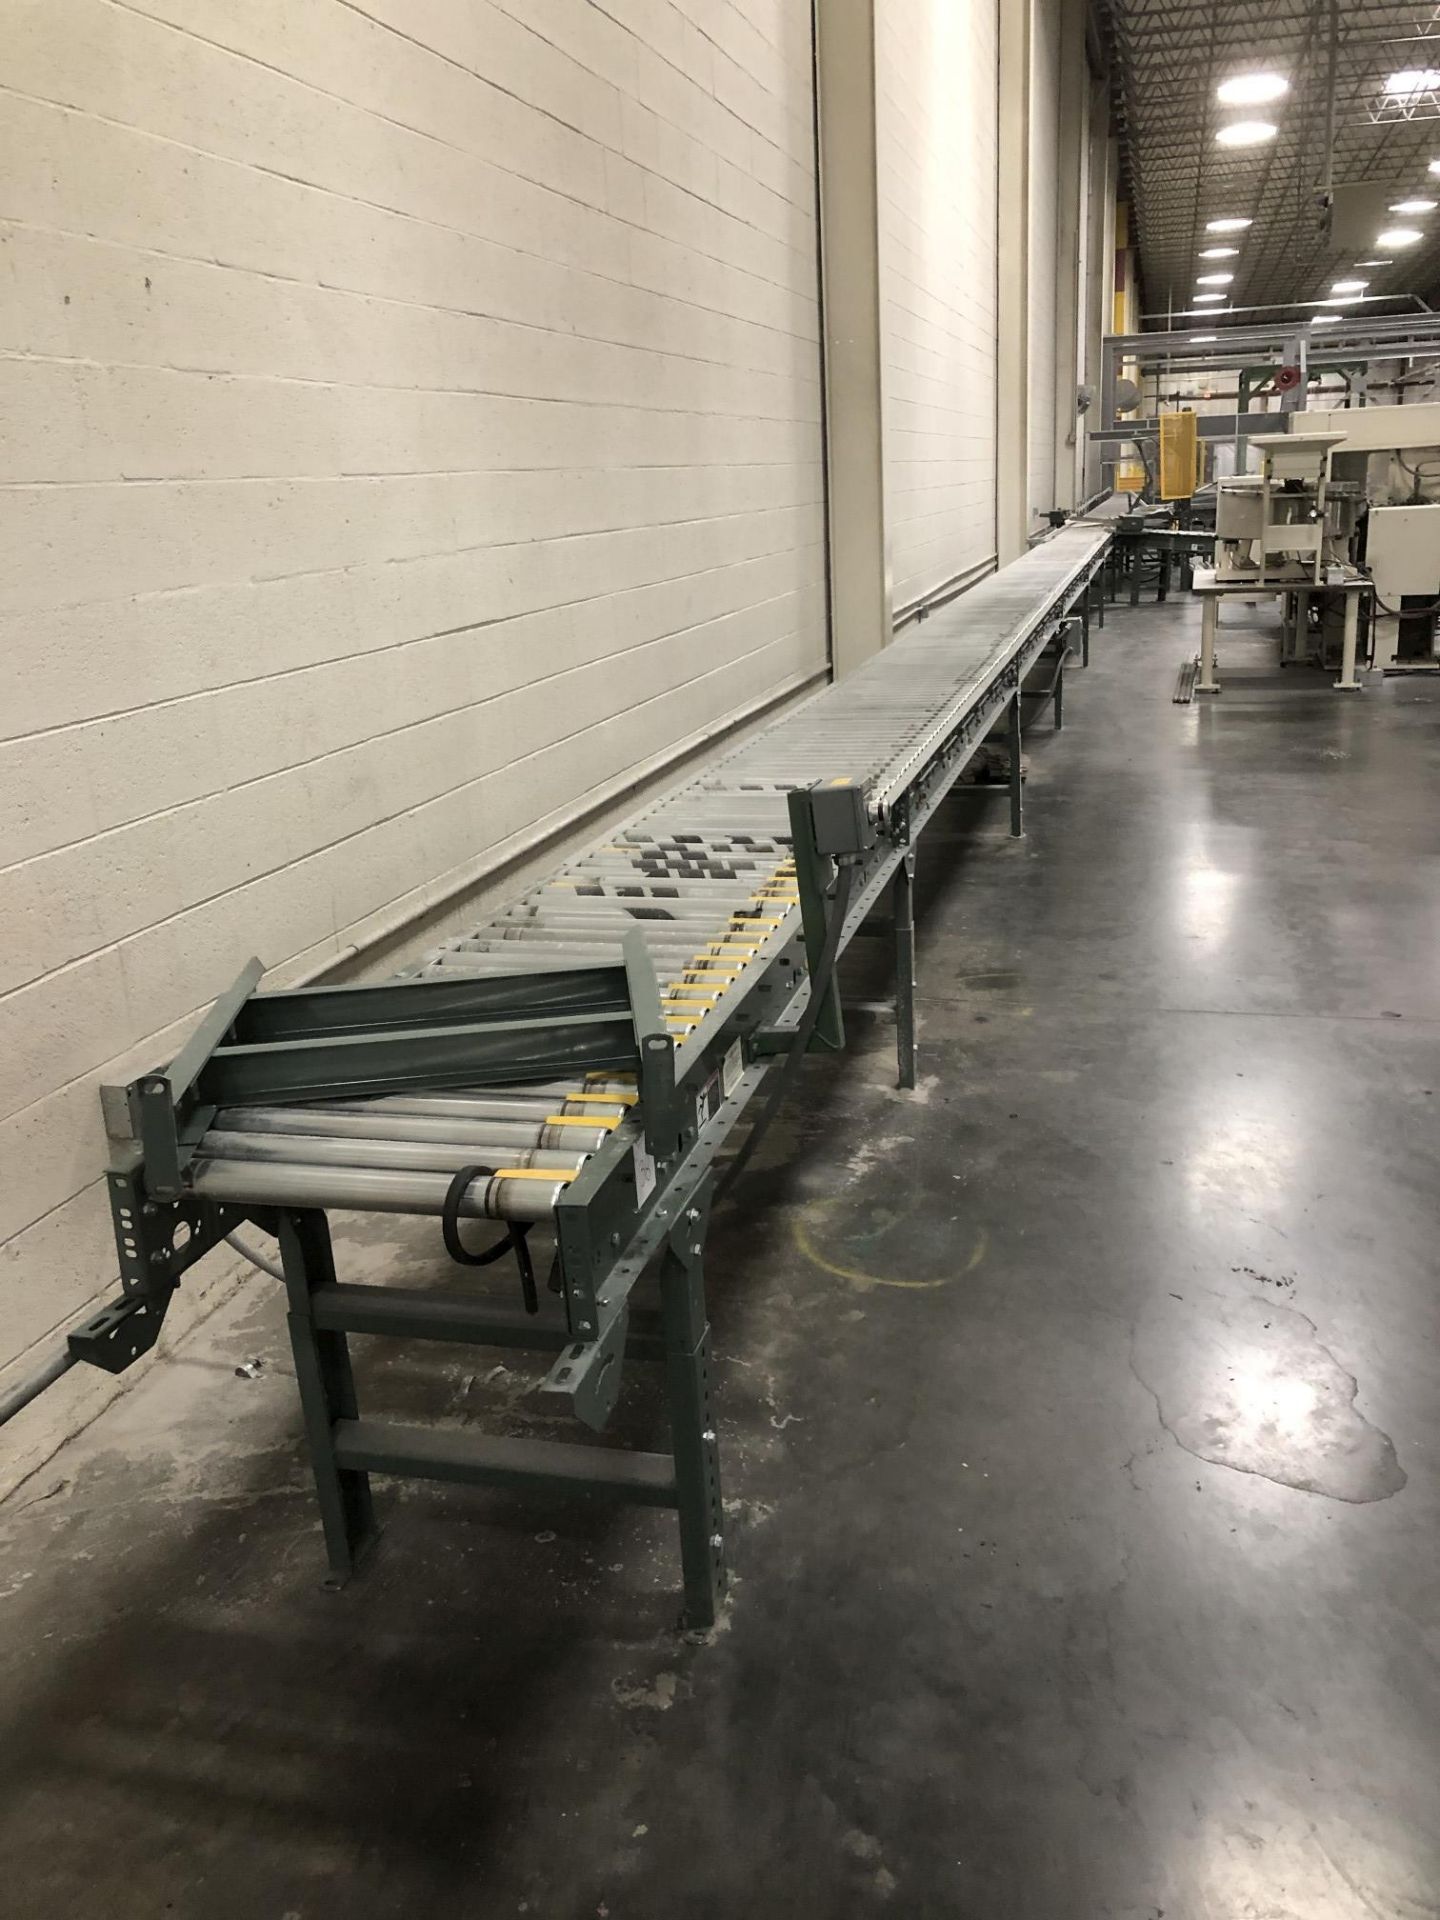 All Hytrol Conveyor Throughout Entire Site, Mostly 20" Wide Powered Roller Conveyor [Please - Image 41 of 80